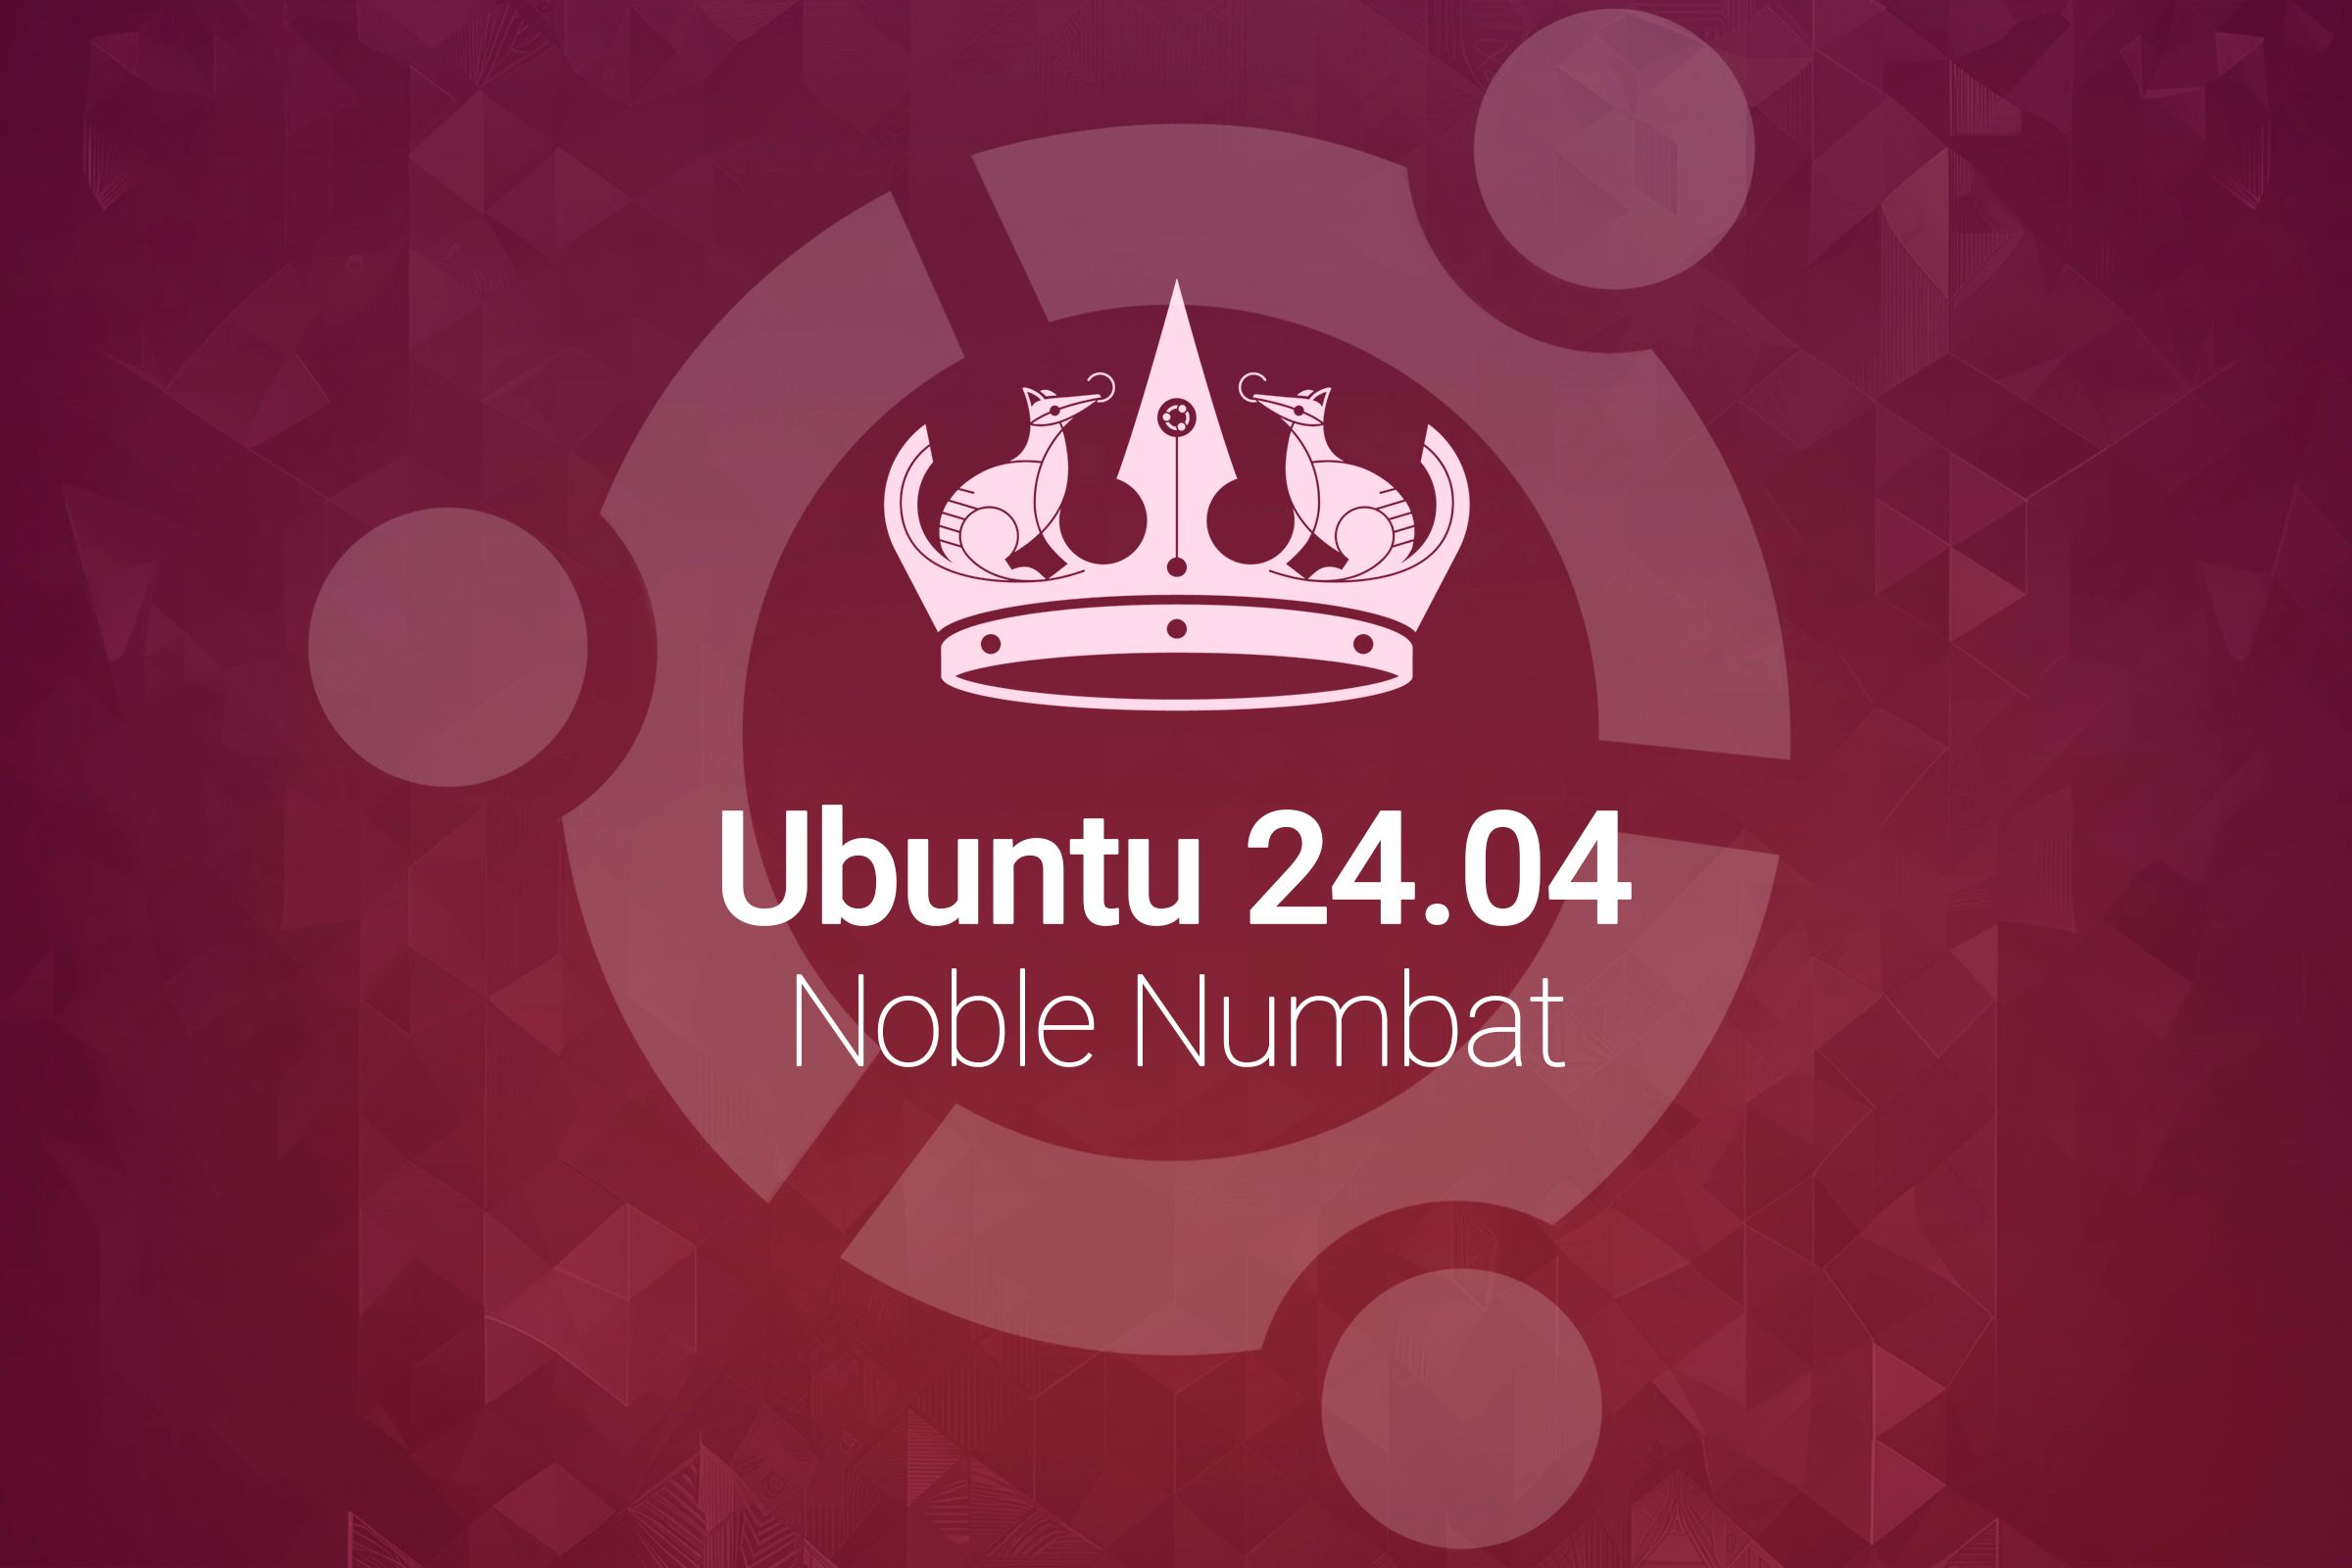 A promotional image of Ubuntu Noble Numbat in the center of the screen and, below, the writing Ubuntu 24.04 Noble Numbat